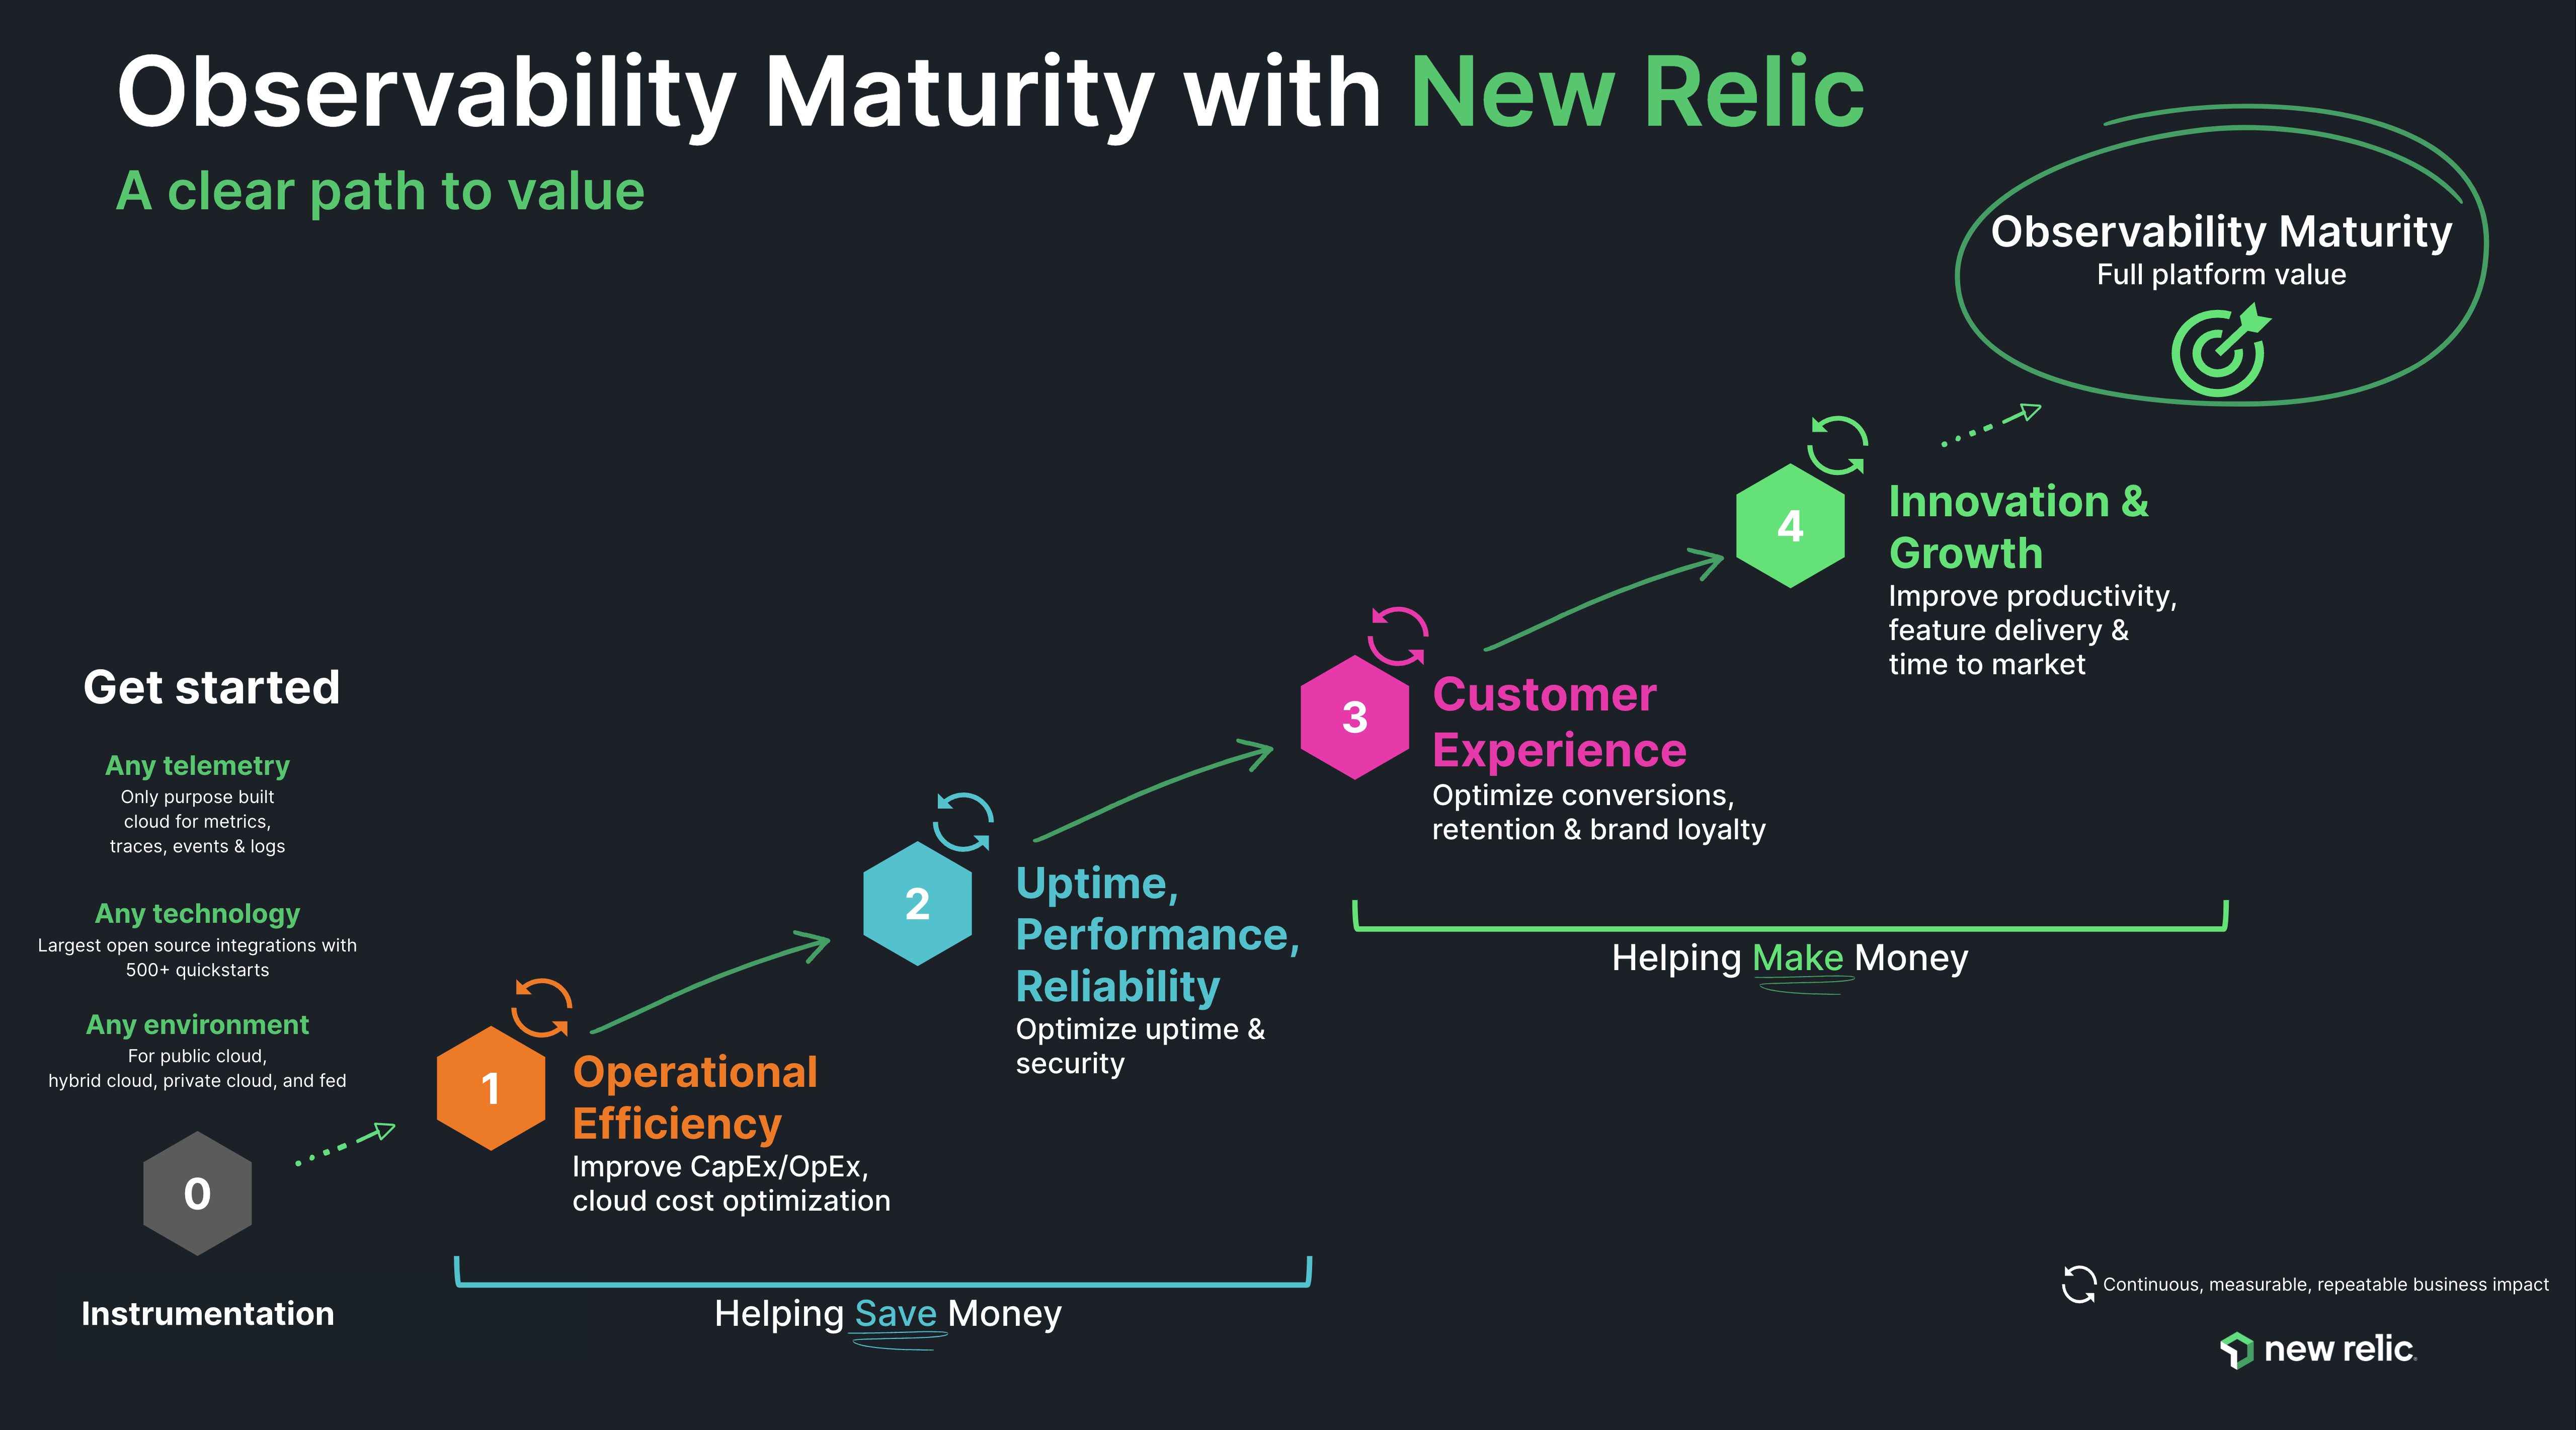 New Relic Observability Maturity